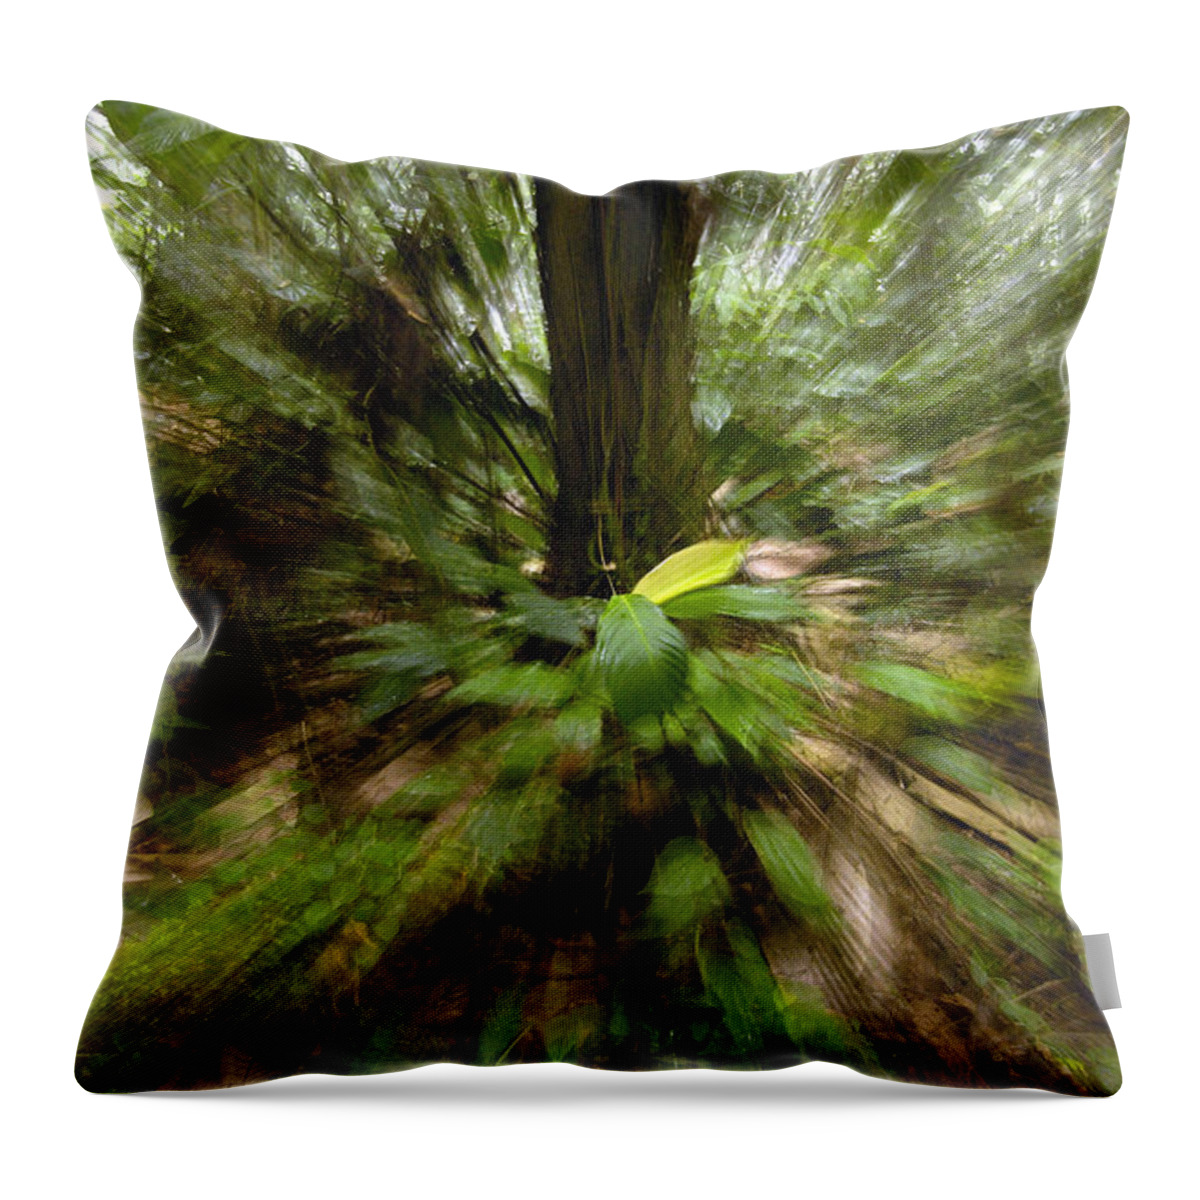 Feb0514 Throw Pillow featuring the photograph Rainforest Andes Mountains Ecuador #1 by Pete Oxford